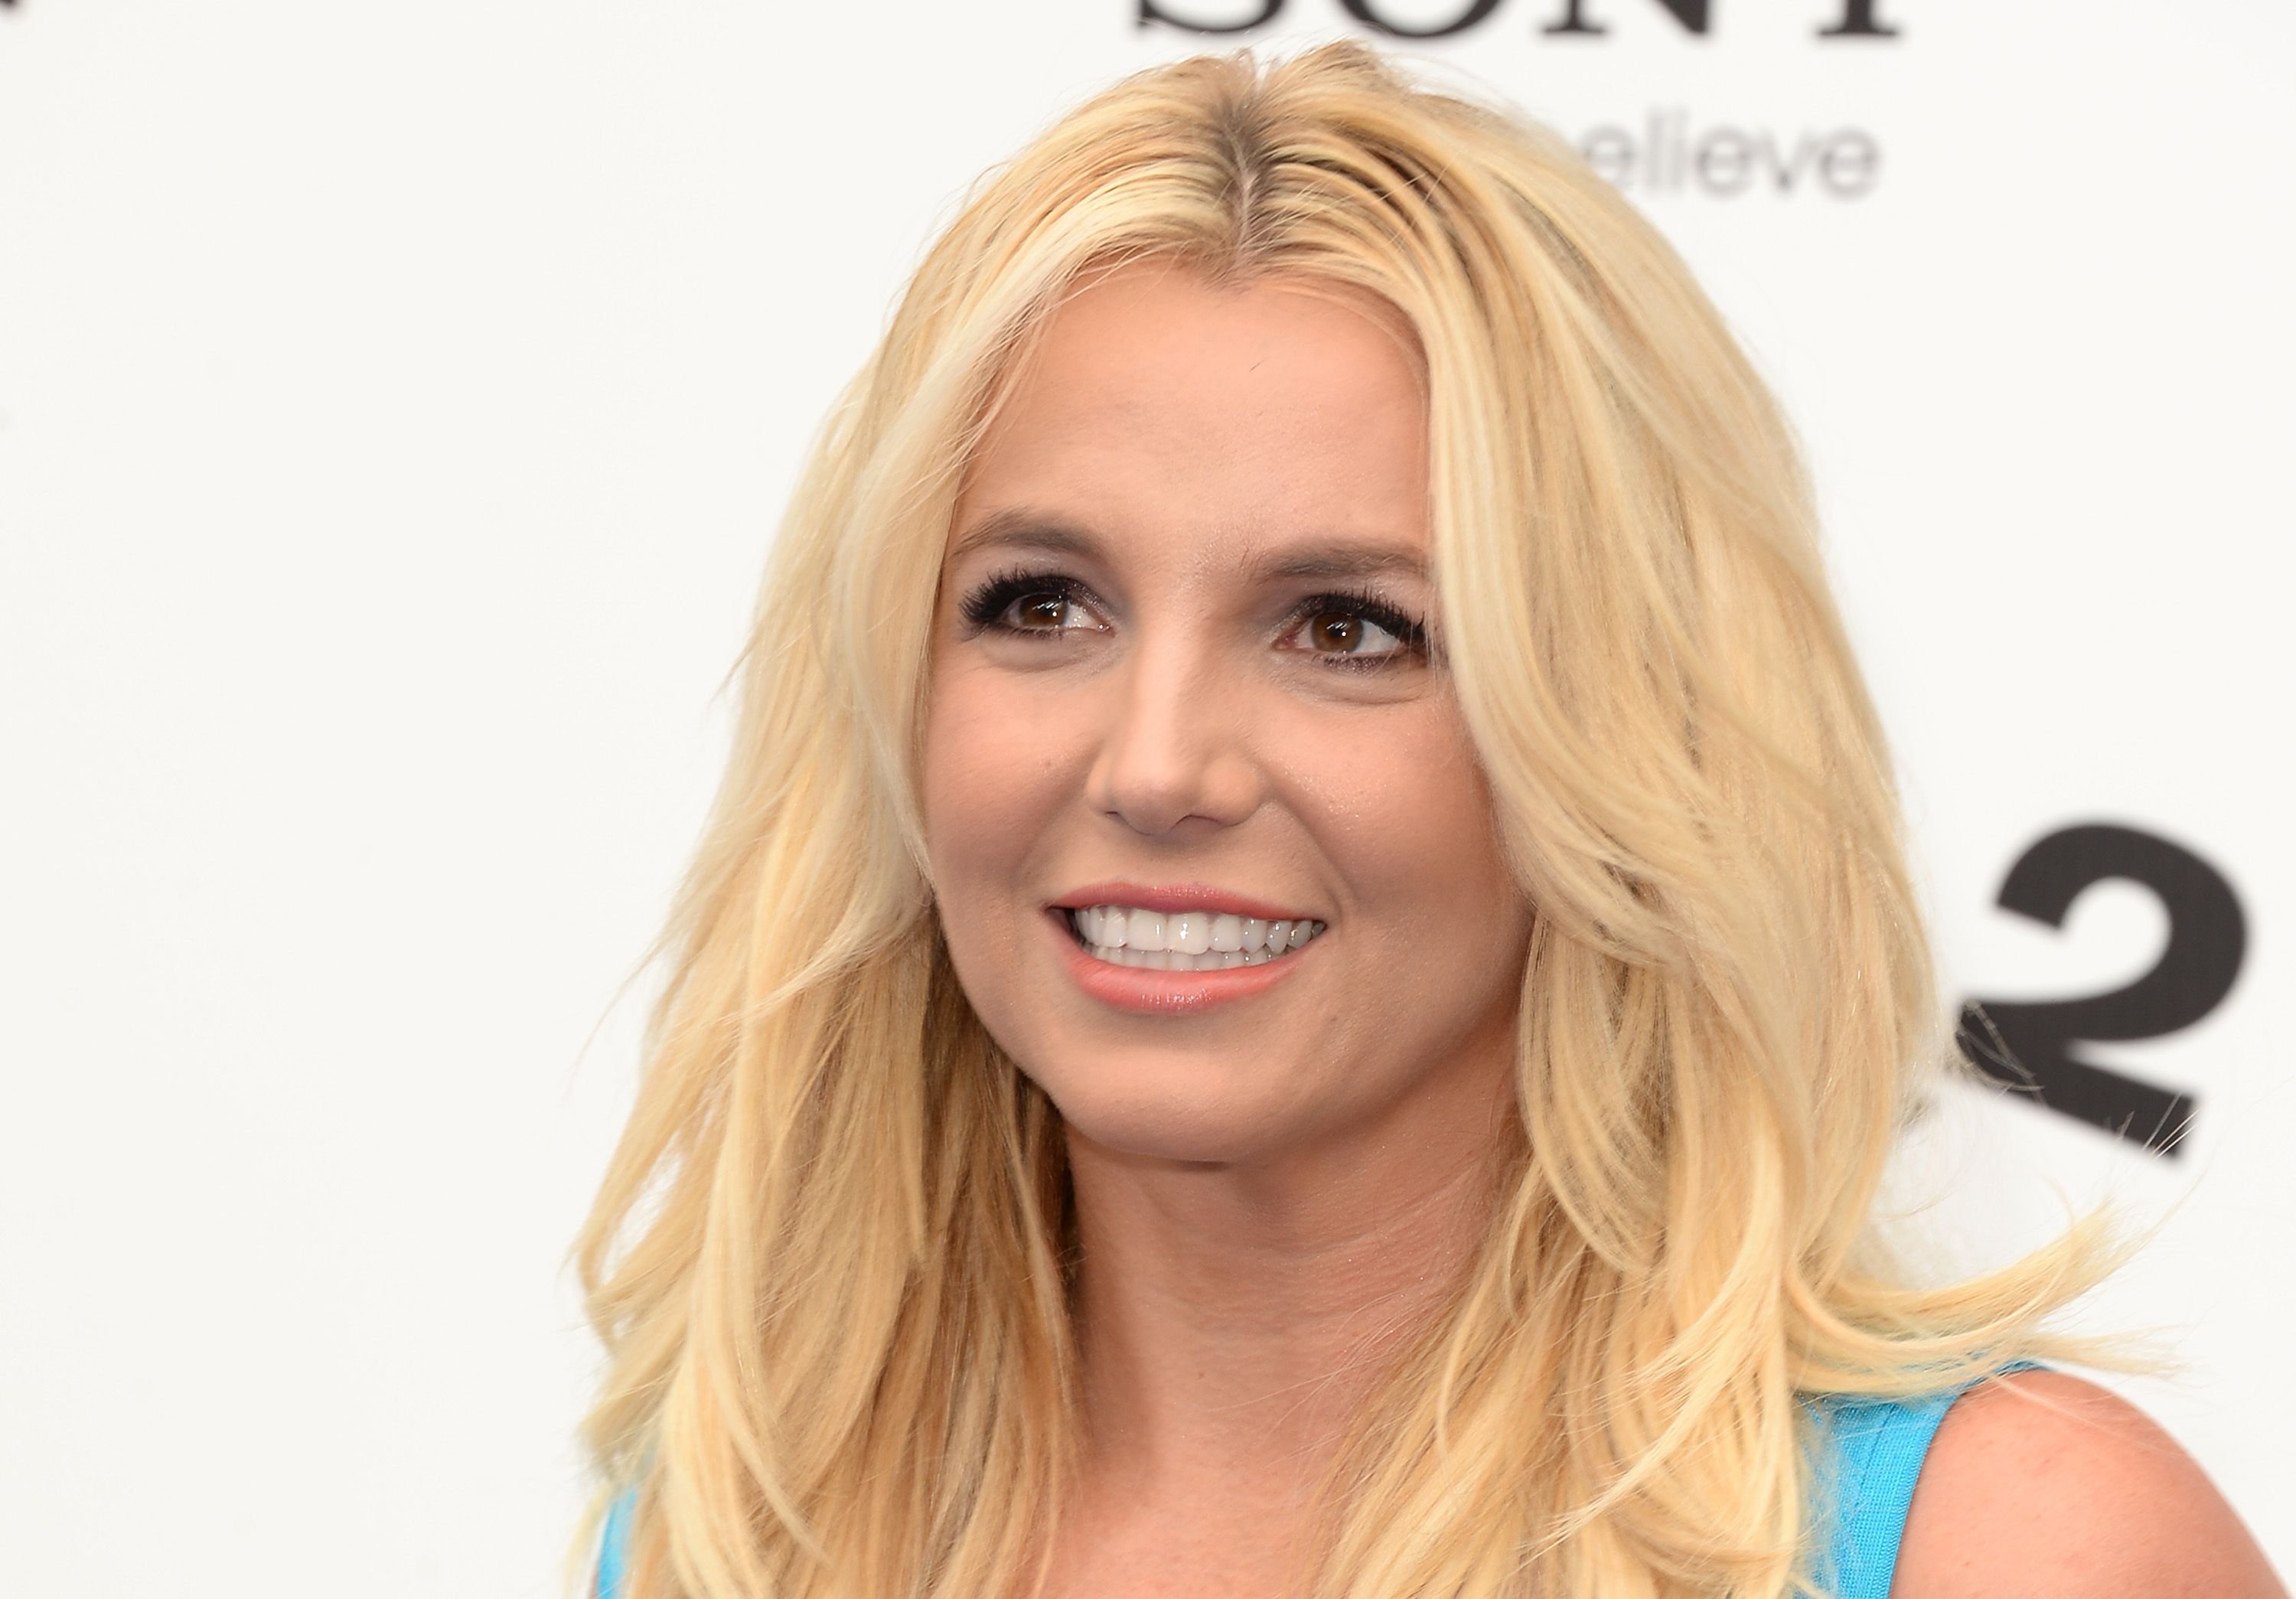 Britney Spears at the premiere of Columbia Pictures' "Smurfs 2" on July 28, 2013 in Westwood, California | Source: Getty Images